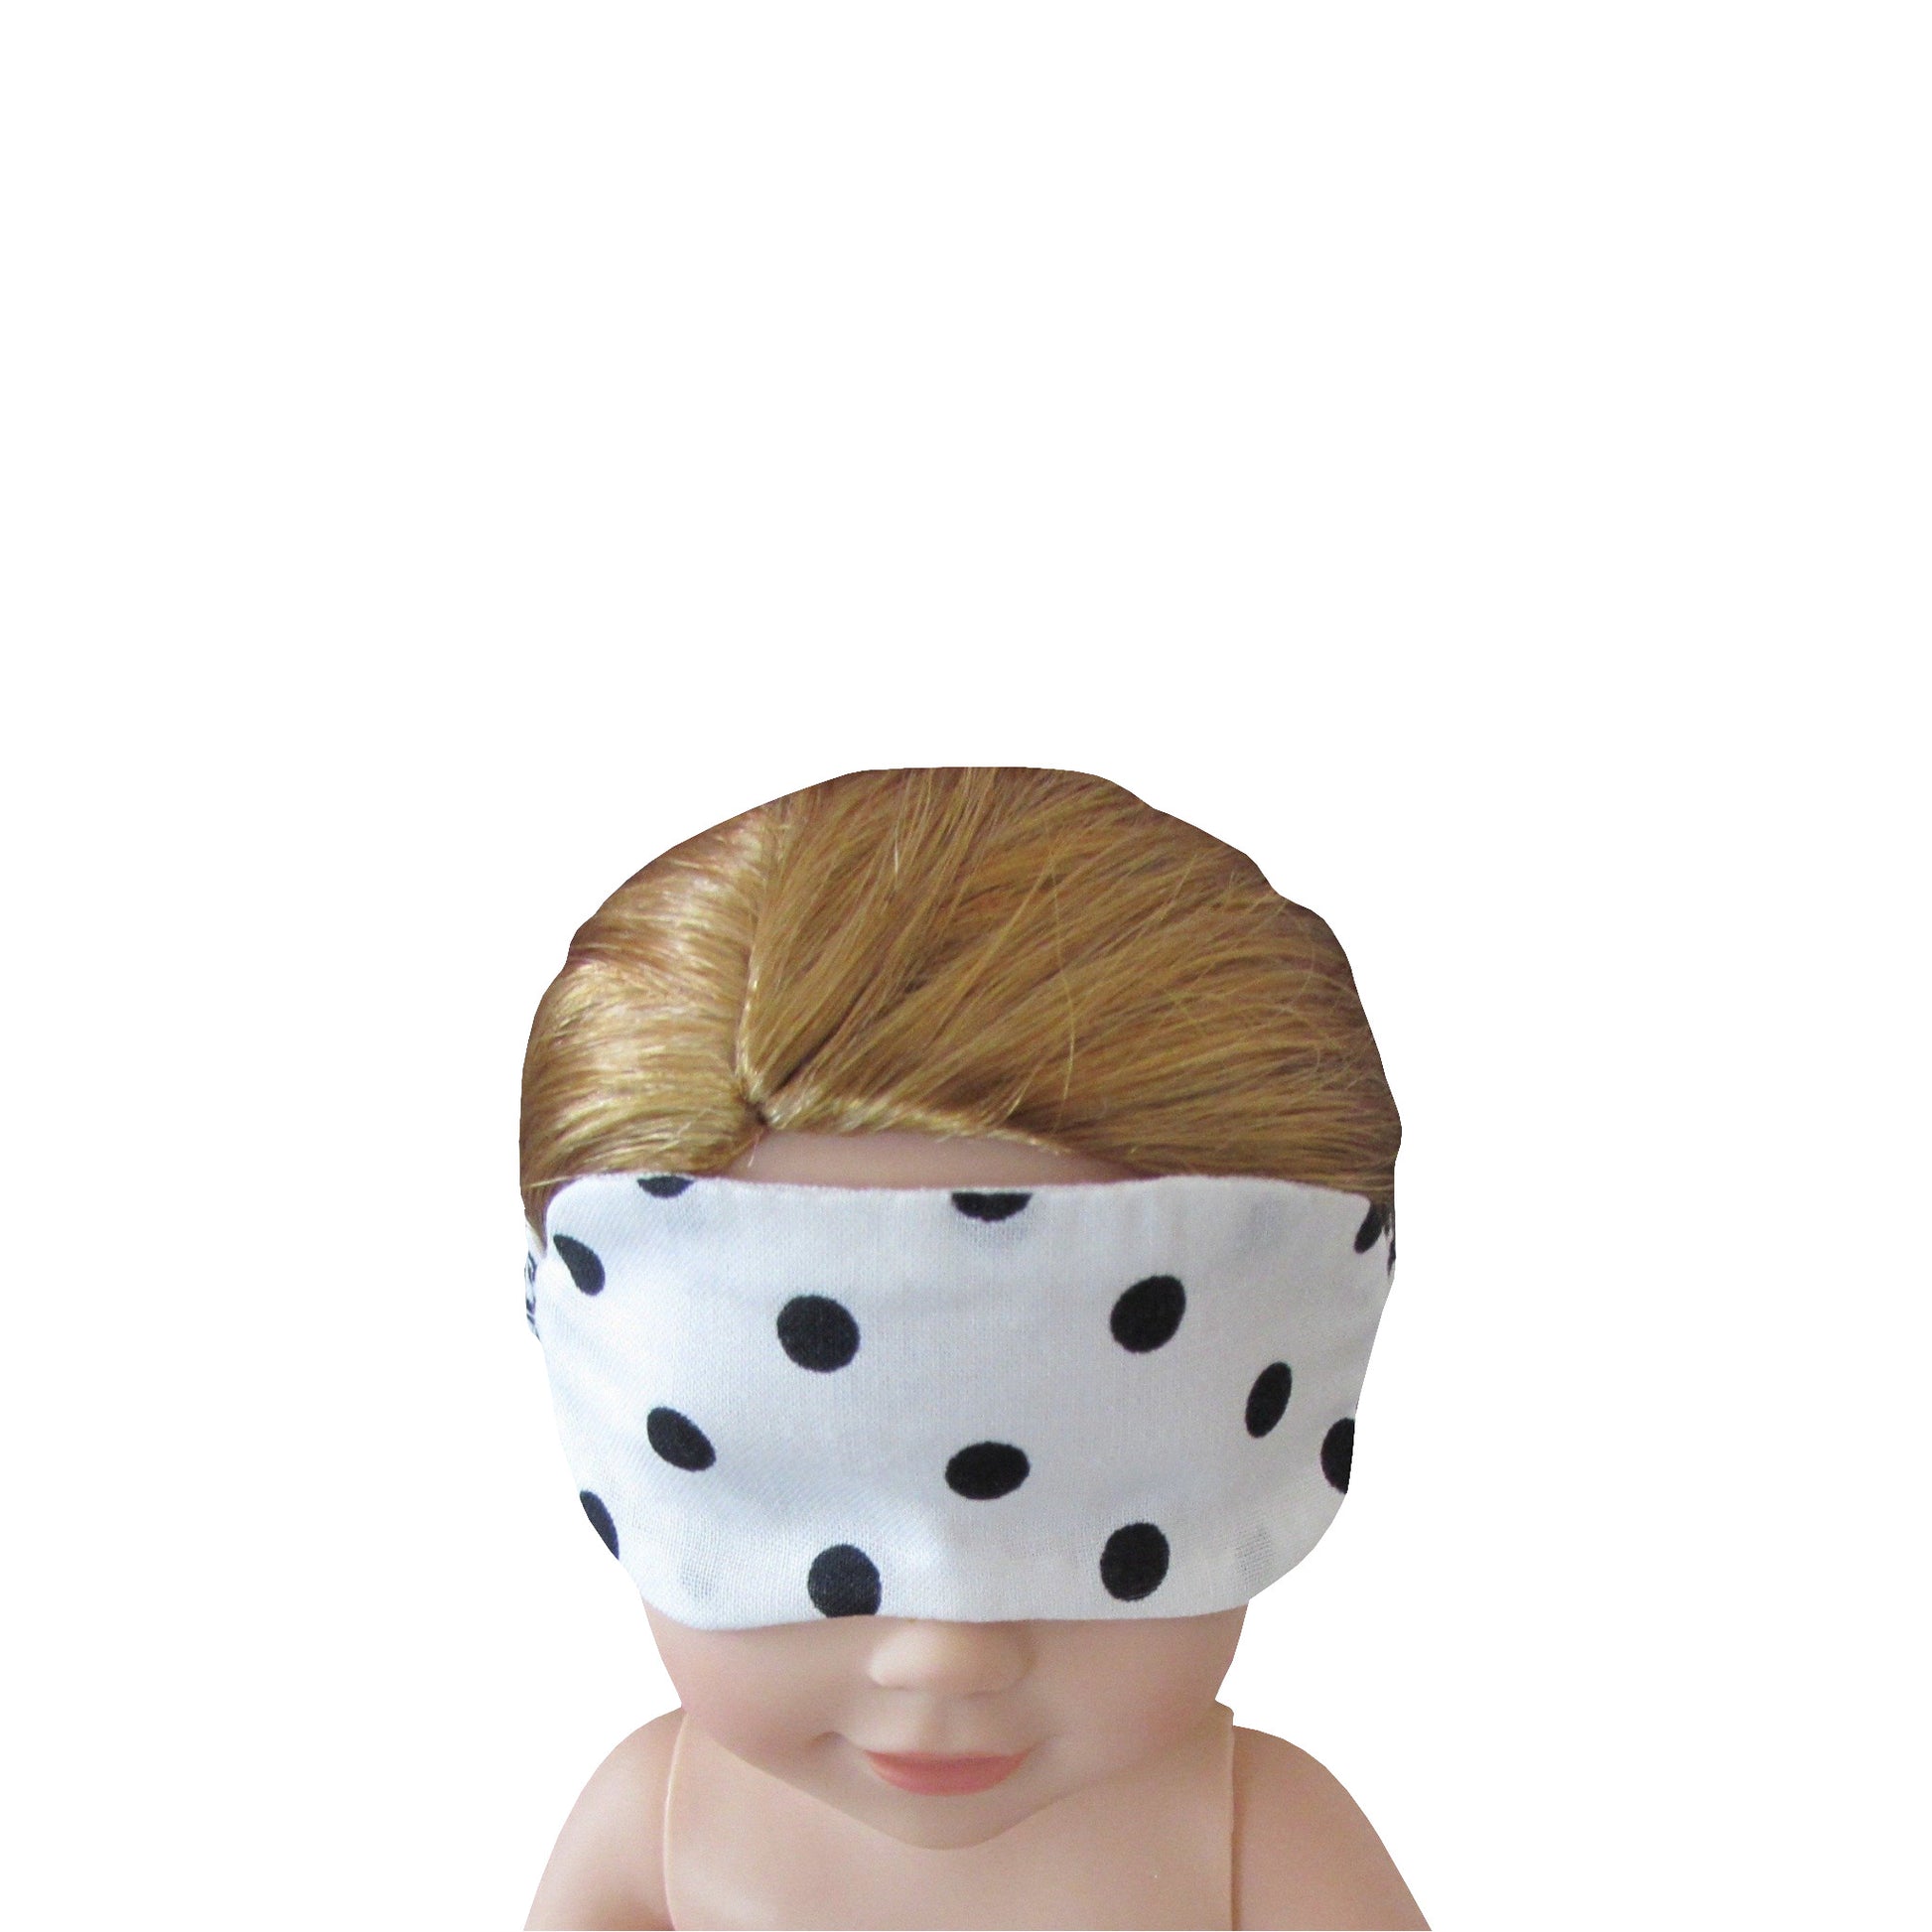 Black Dots on White Doll Sleep Mask for 14 1/2-inch dolls with doll